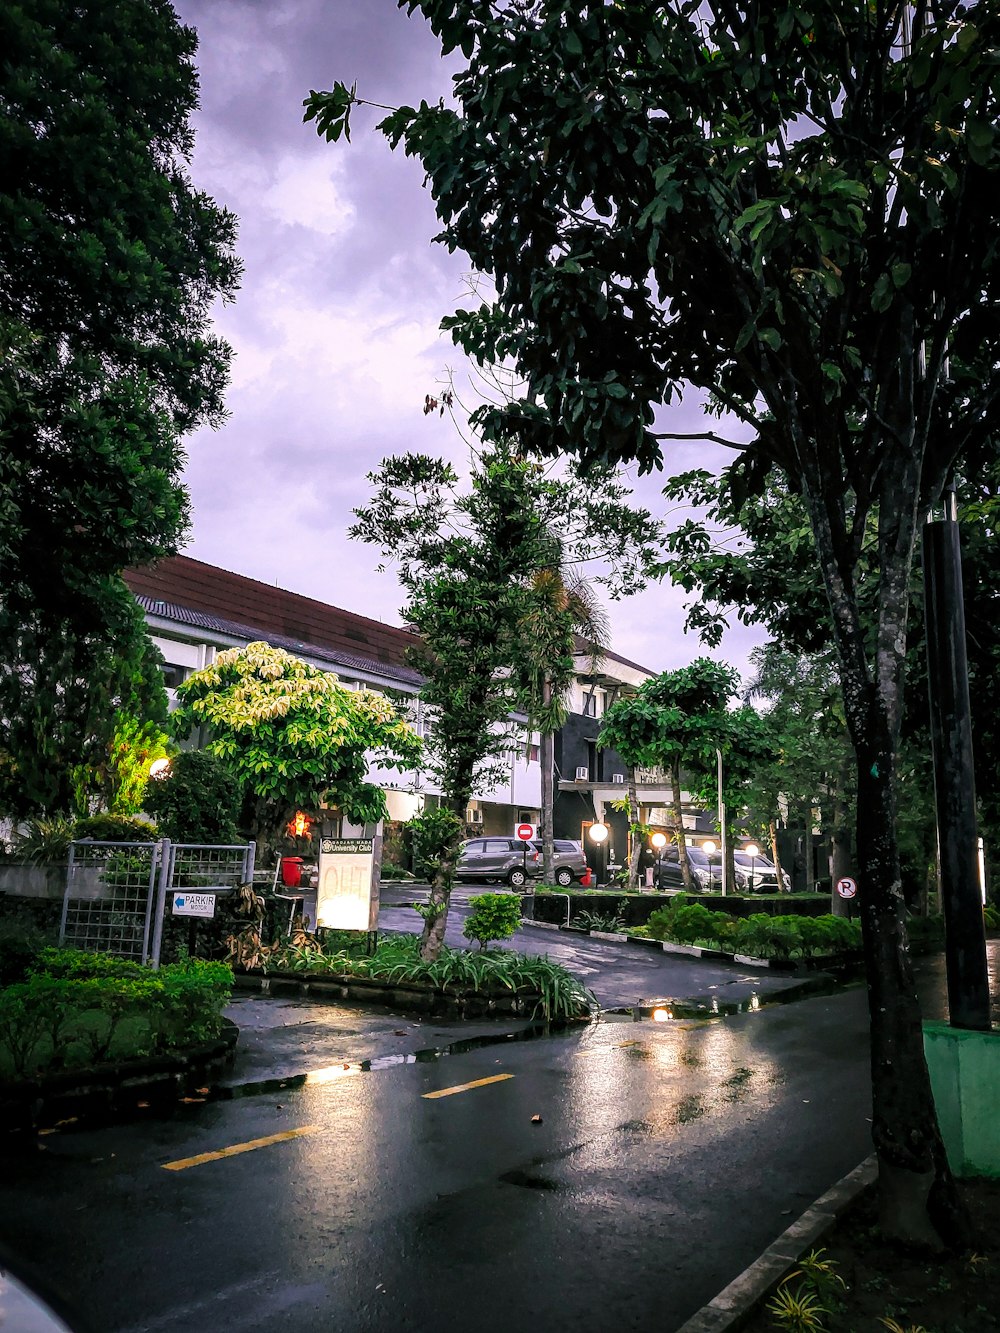 a wet street with trees and a building in the background